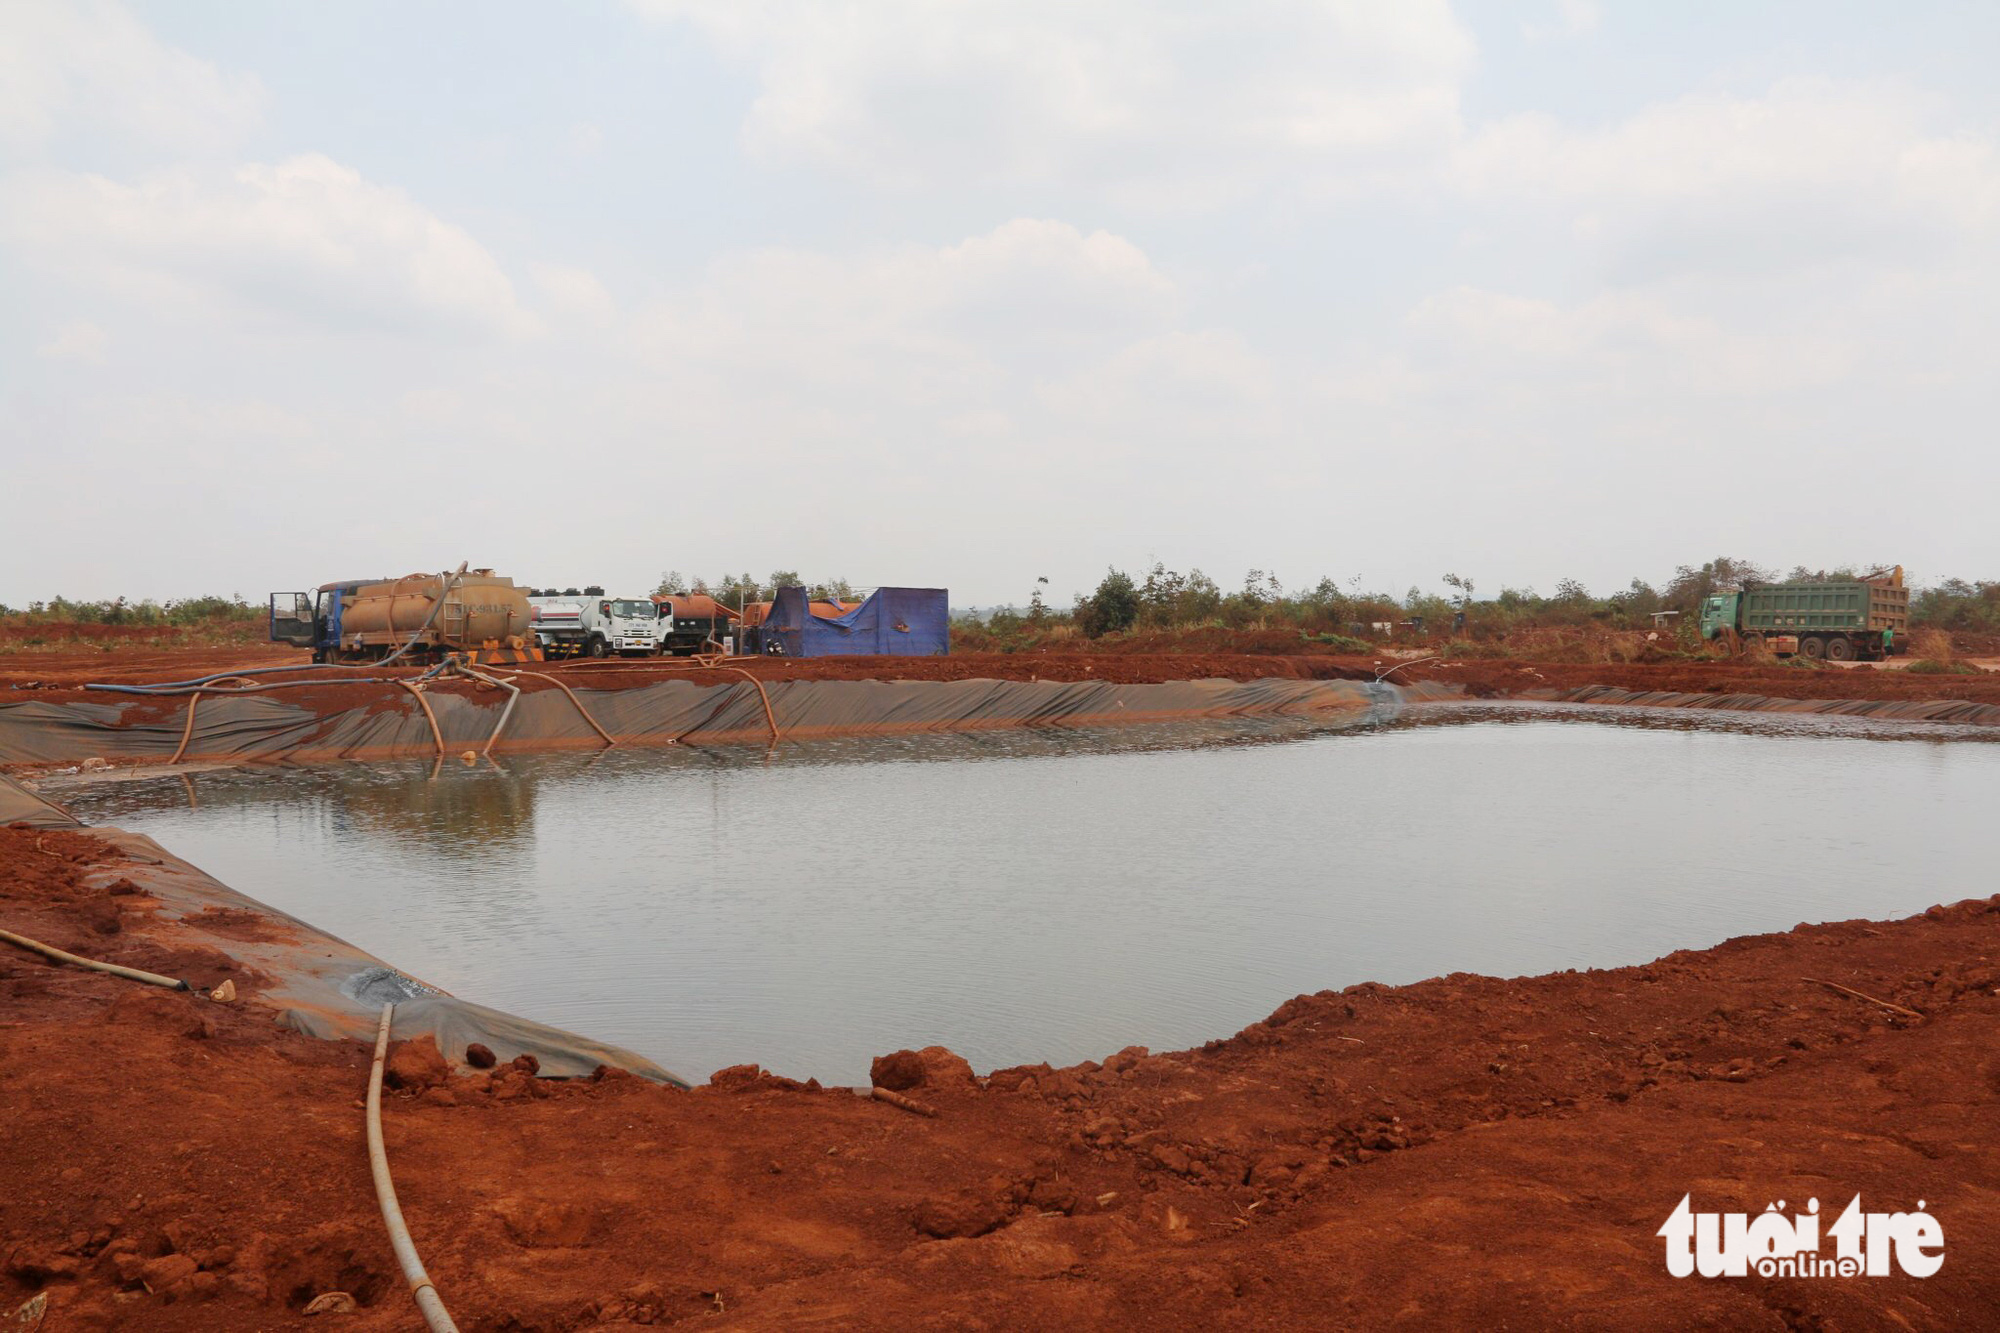 A reservoir supplies water for tank trucks to spray water at the site.